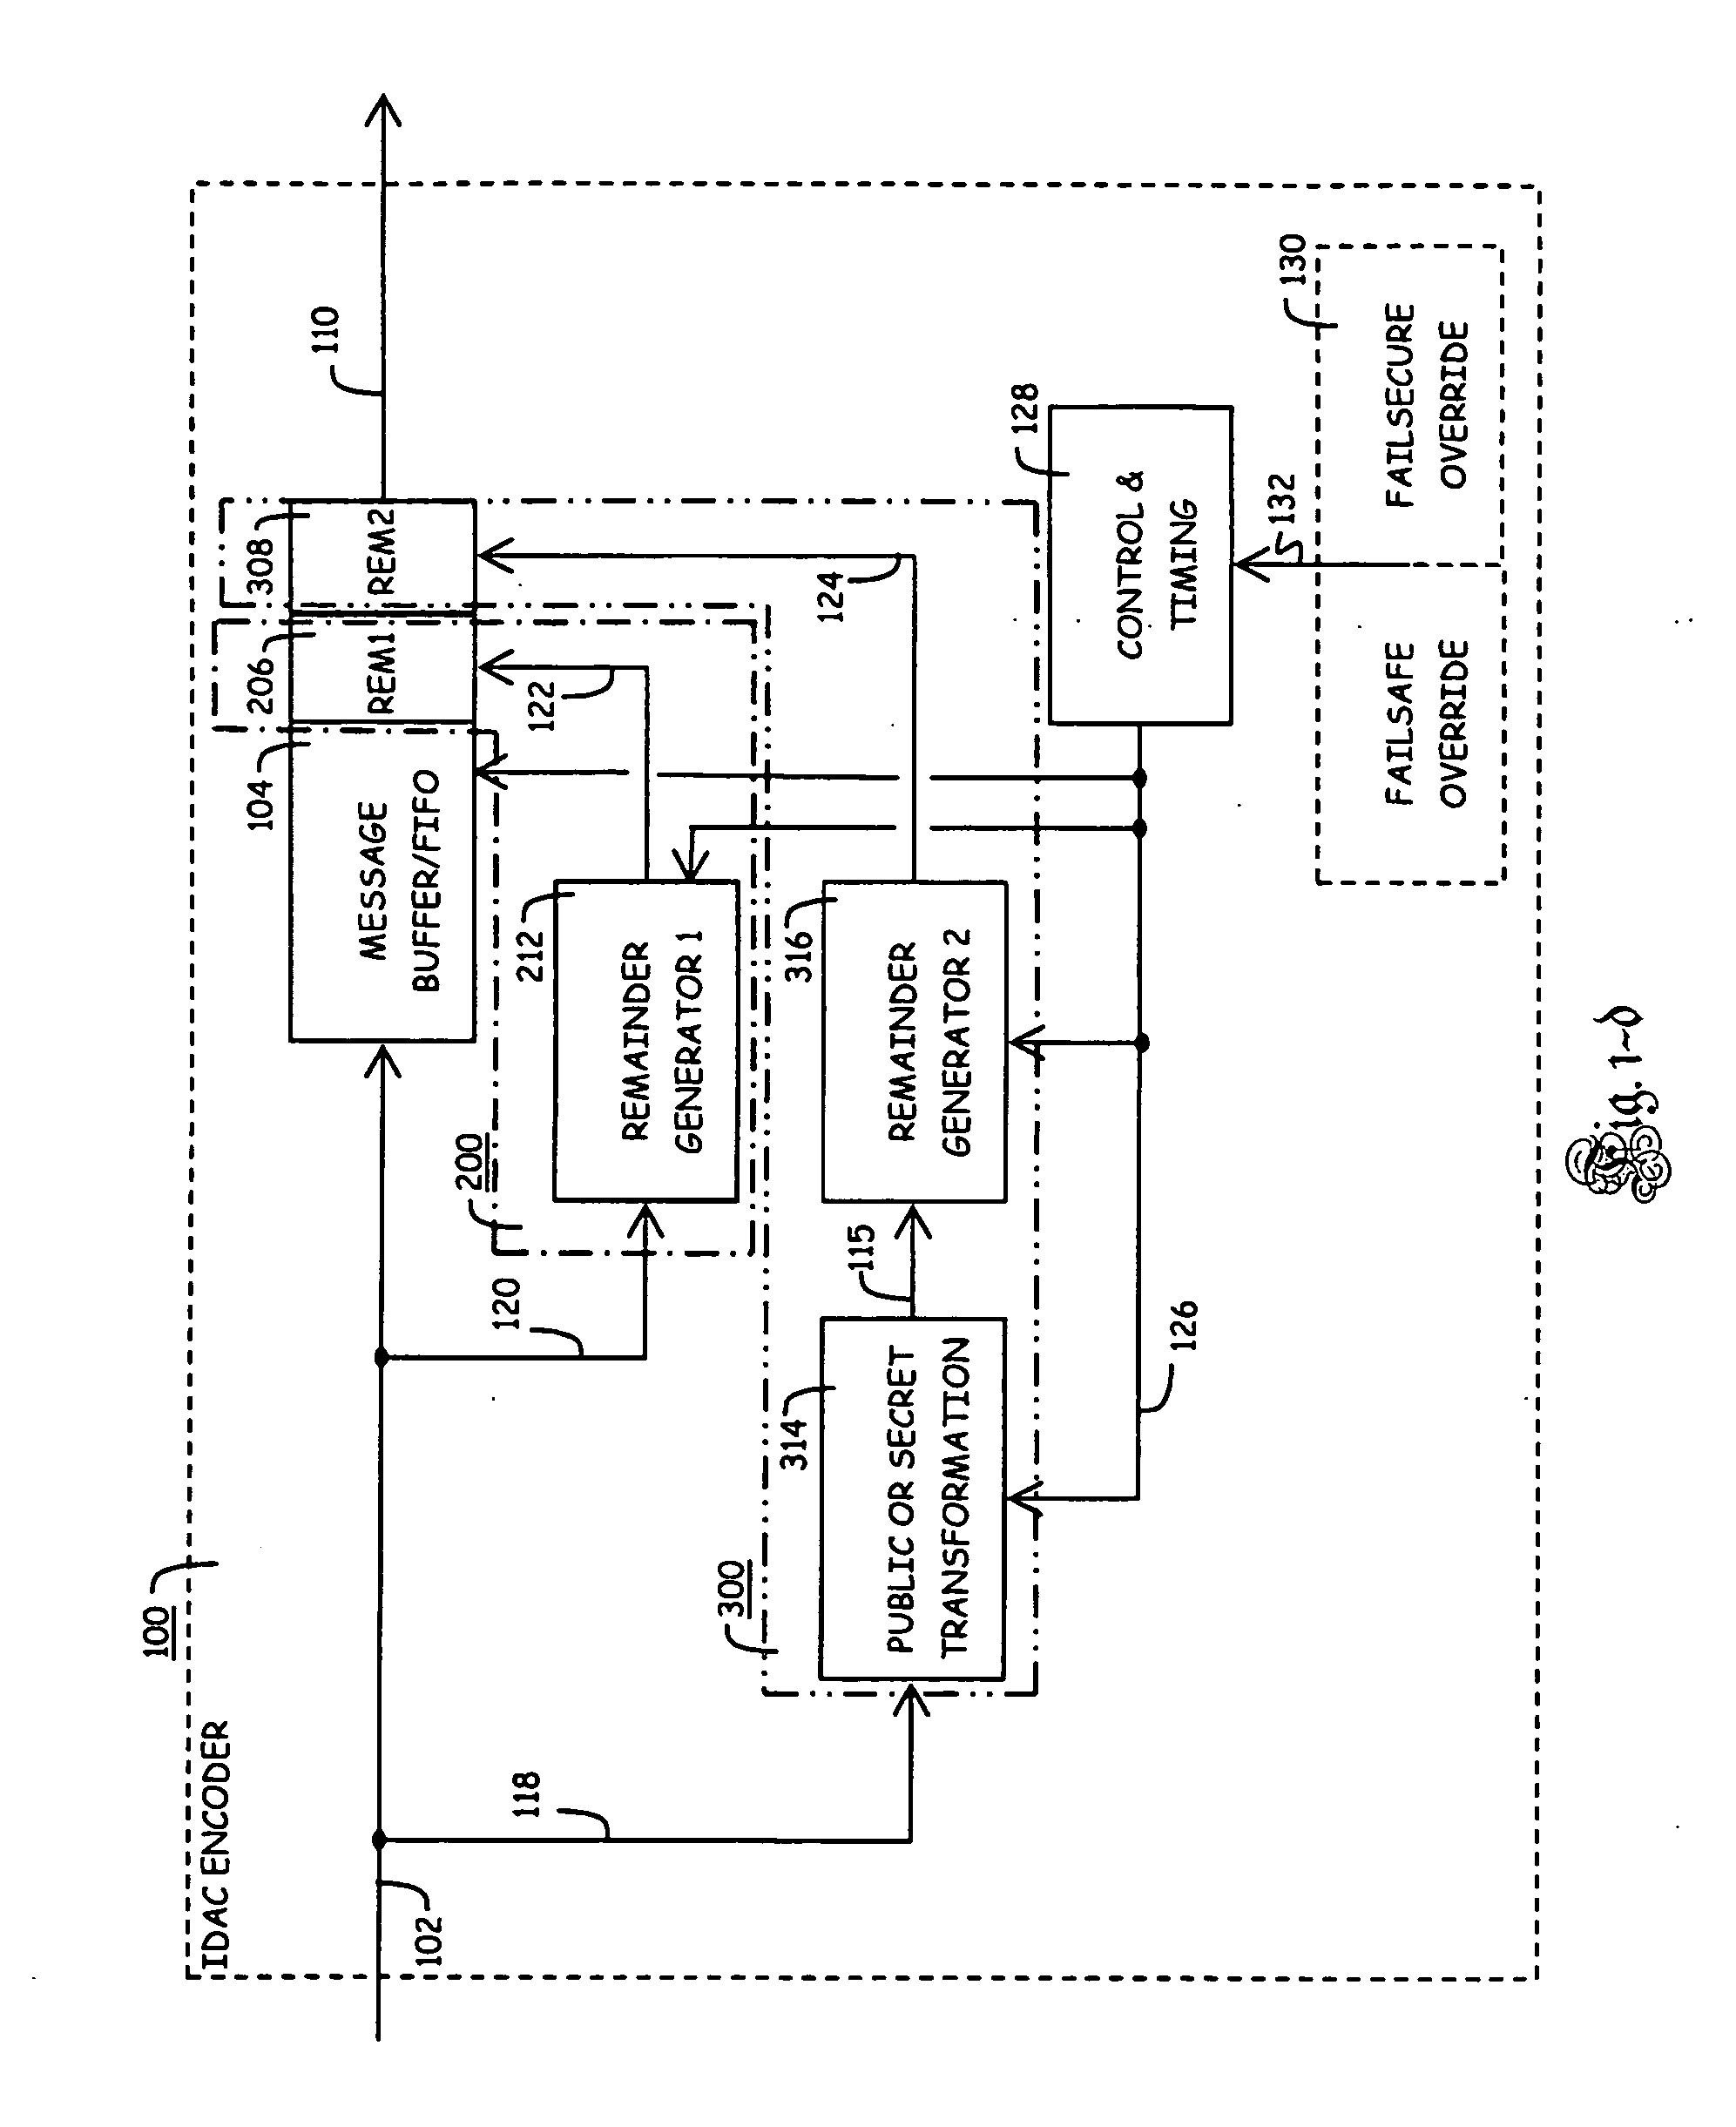 Method of Identifying and Protecting the Integrity of a Set of Source Data